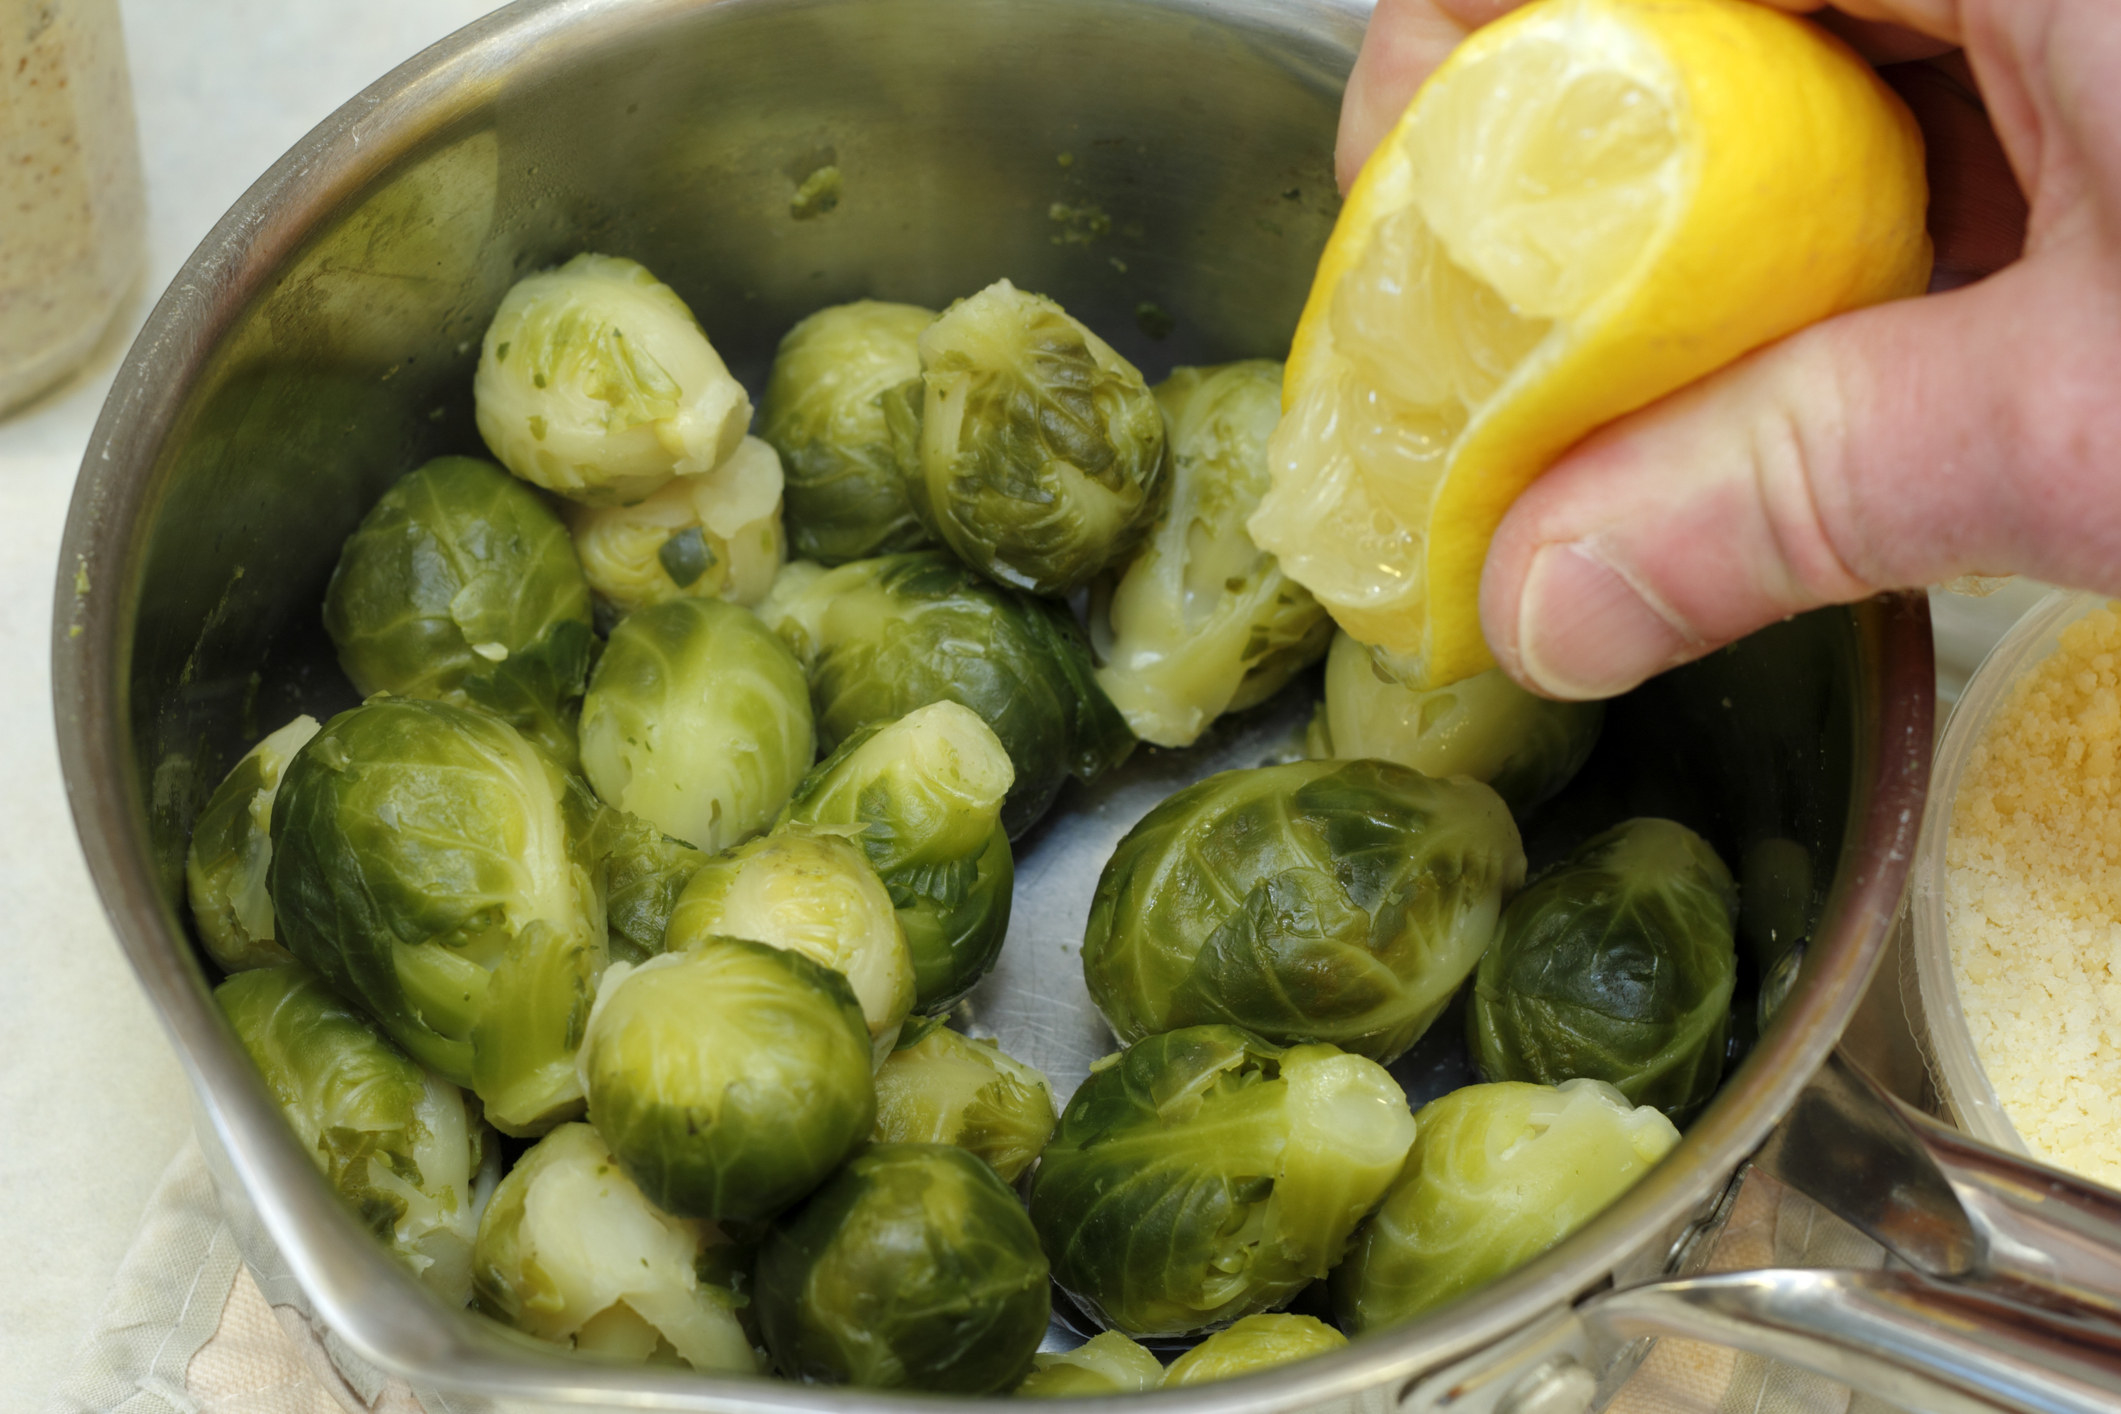 Hand-squeezing lemon juice from a fresh lemon onto cooked Brussels sprouts